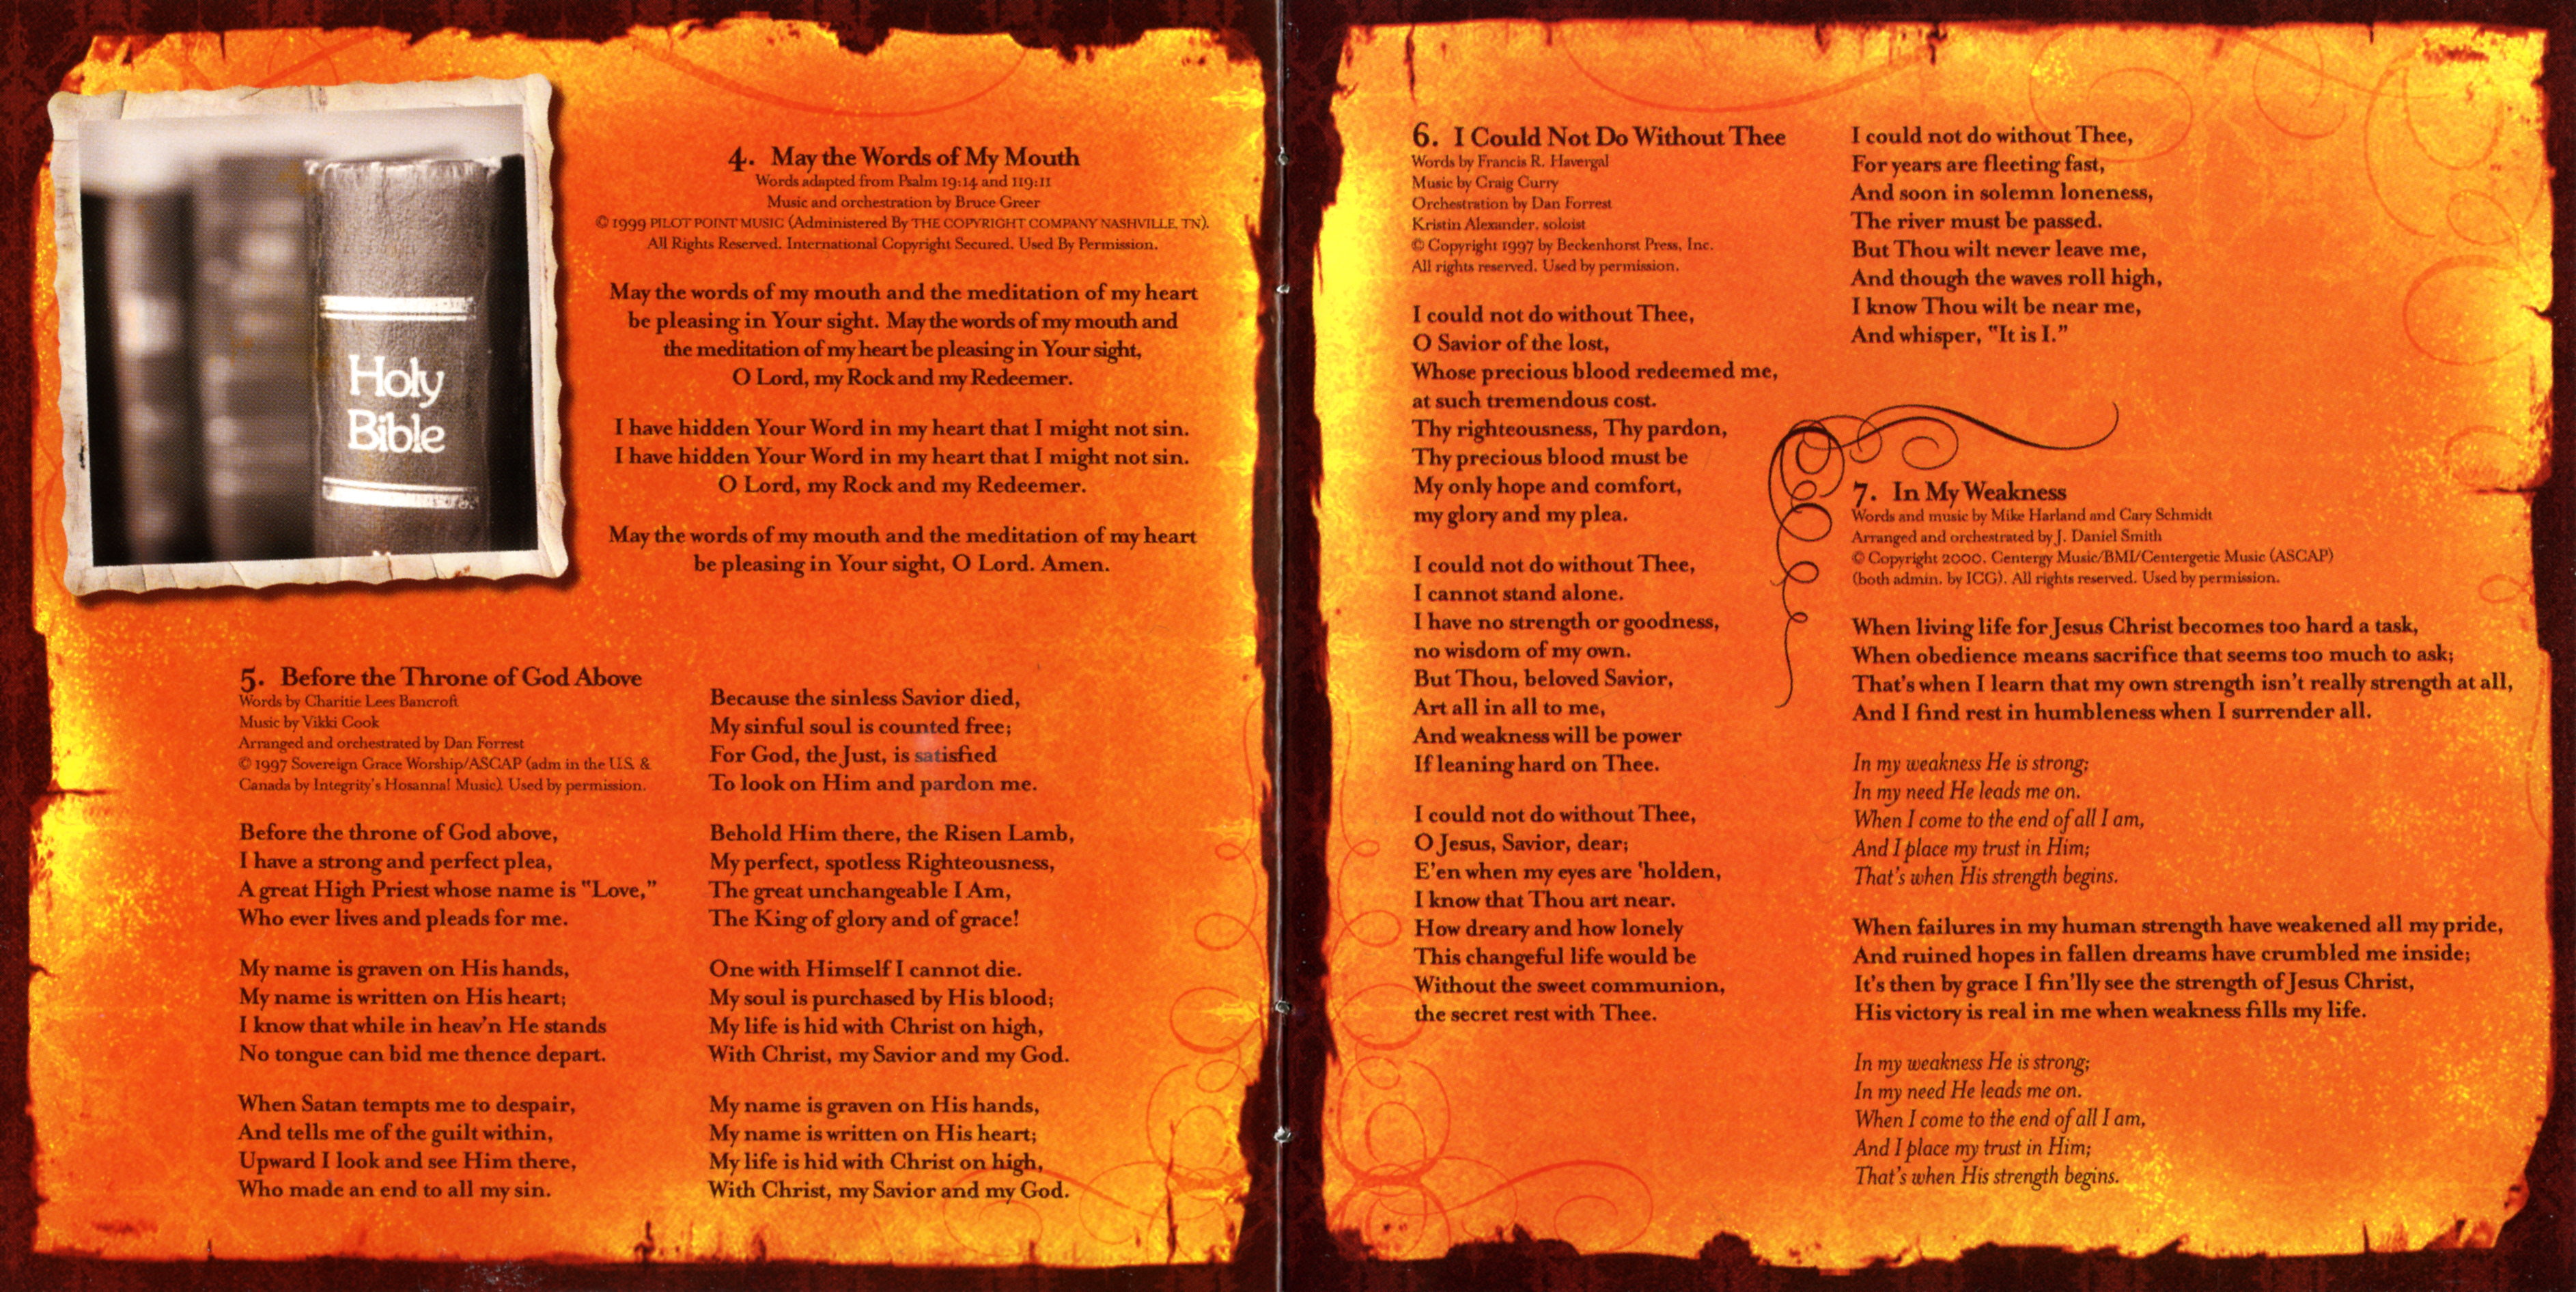 A_Quiet_Heart_The_Complete_CD_2006_Booklet_Side_3_To_4.jpg